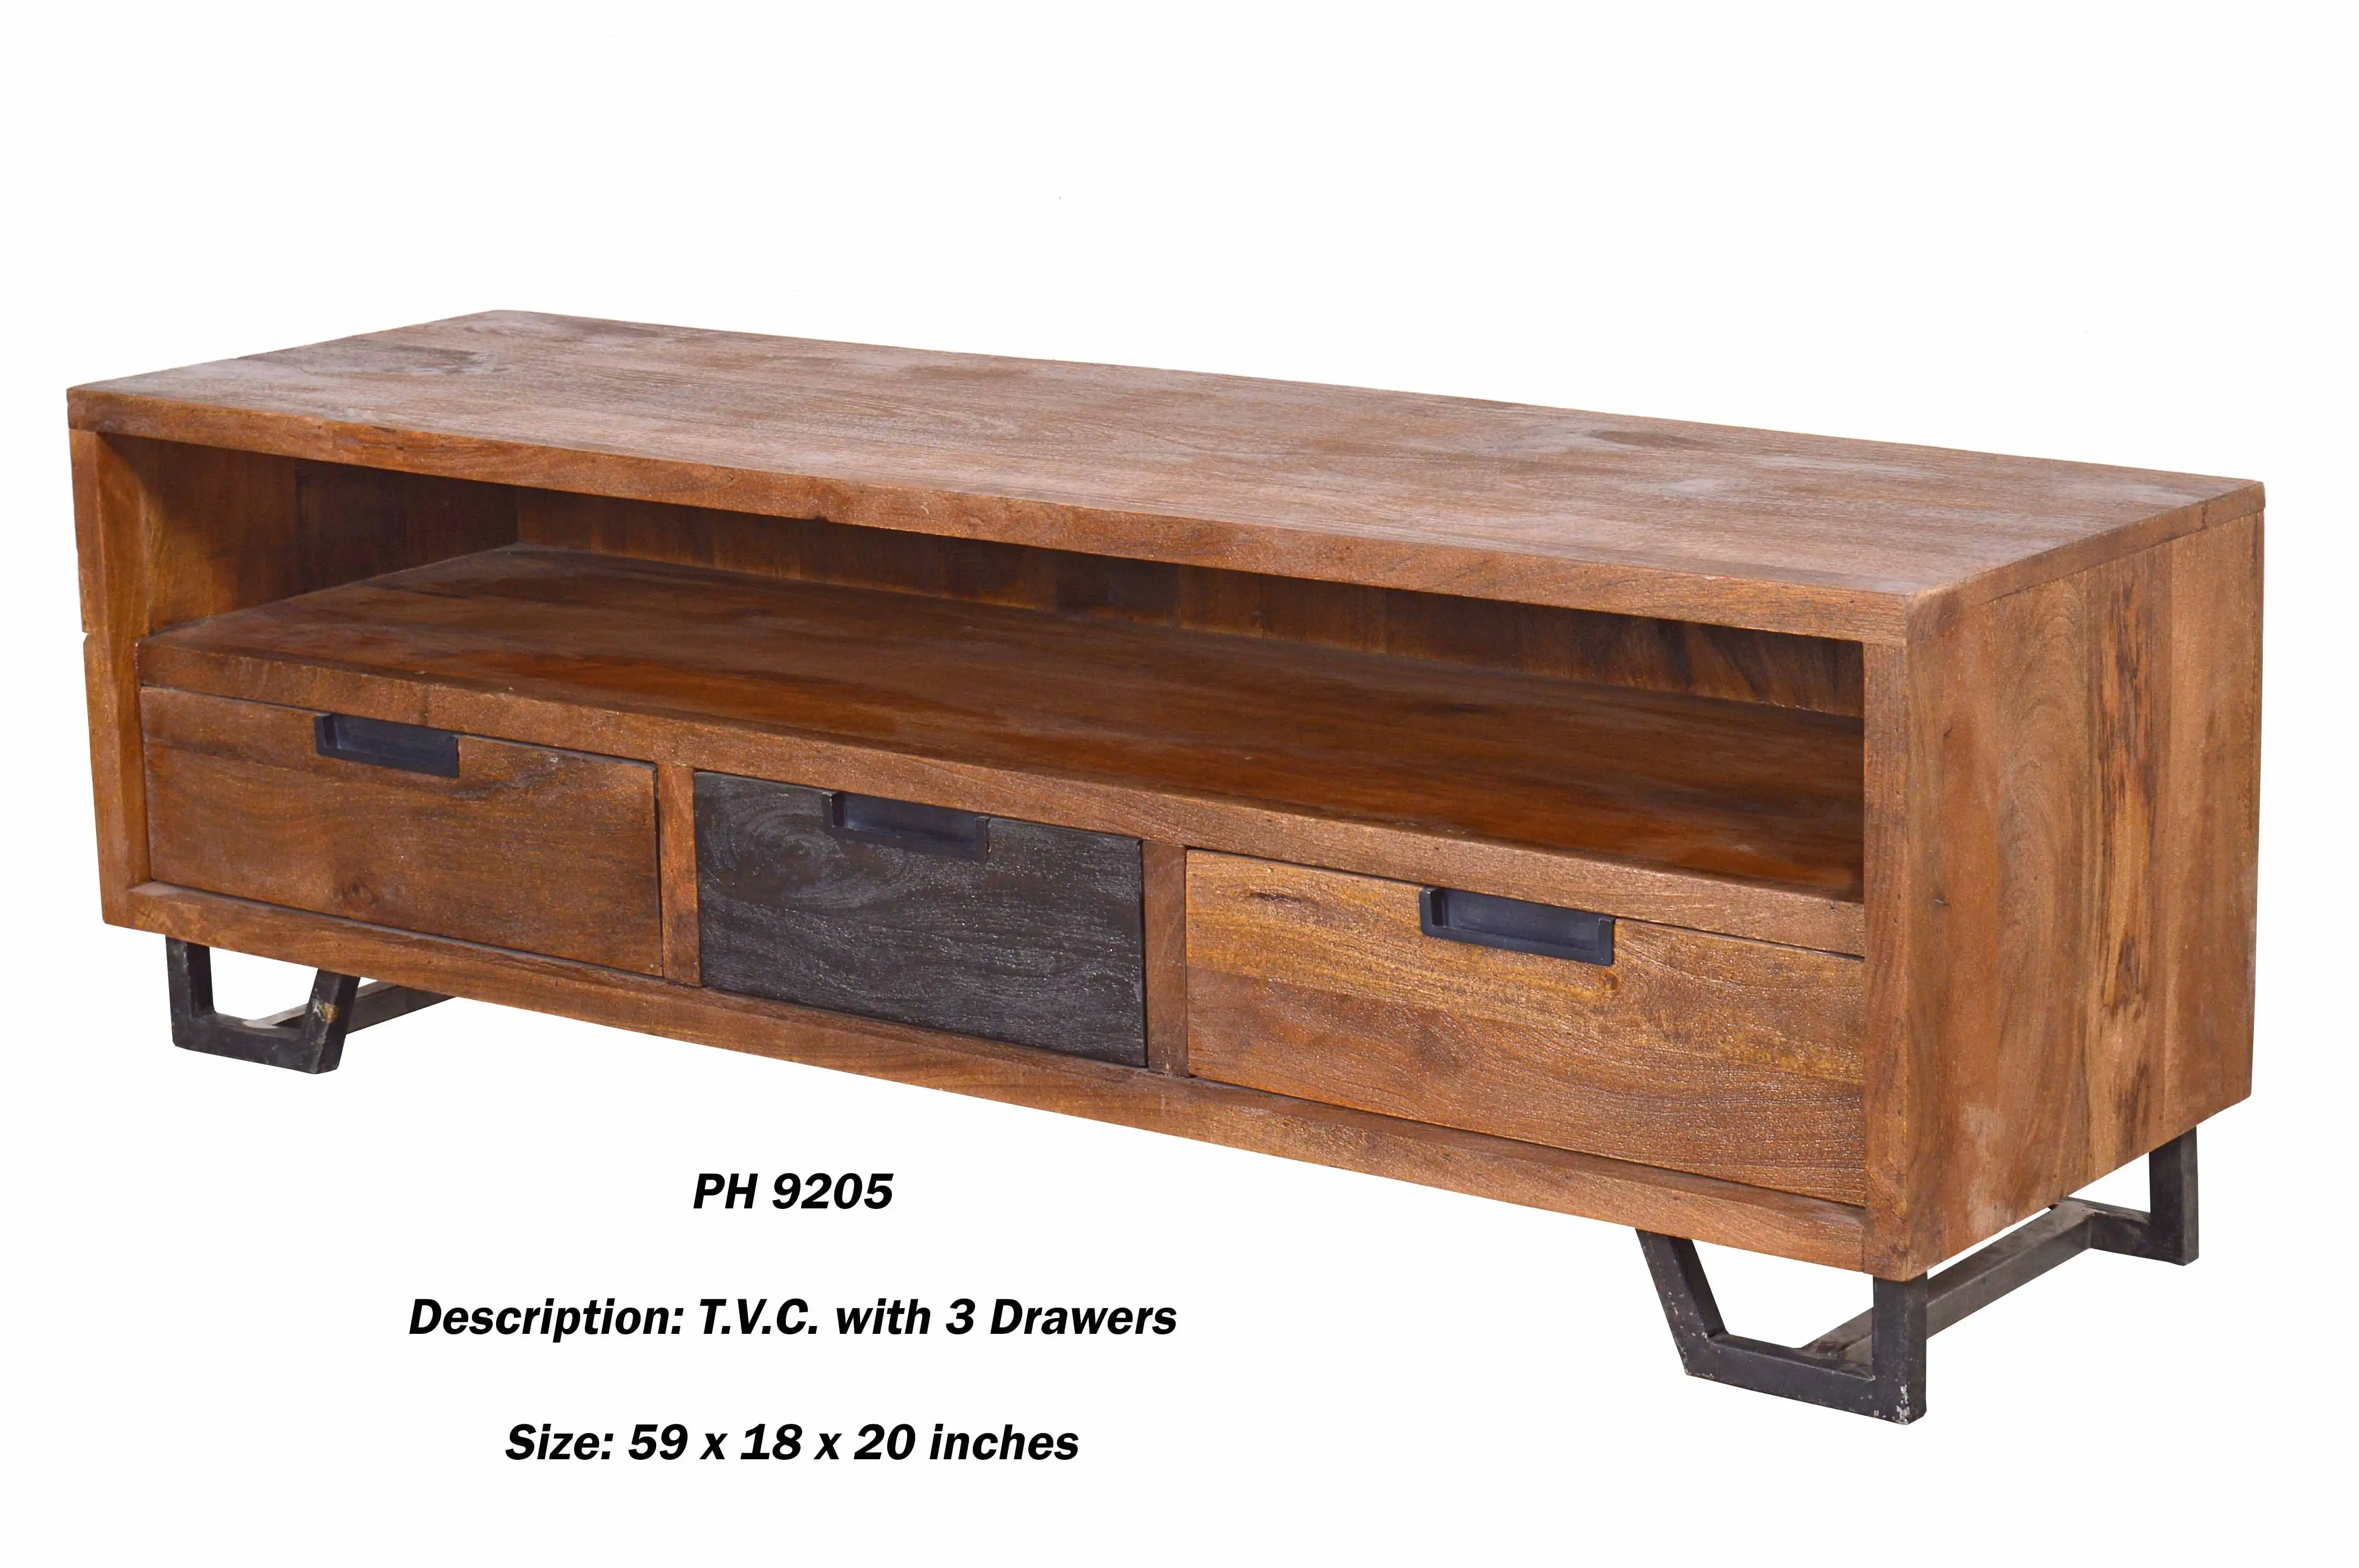 T.V.C. with 3 Drawers
(KD) - popular handicrafts